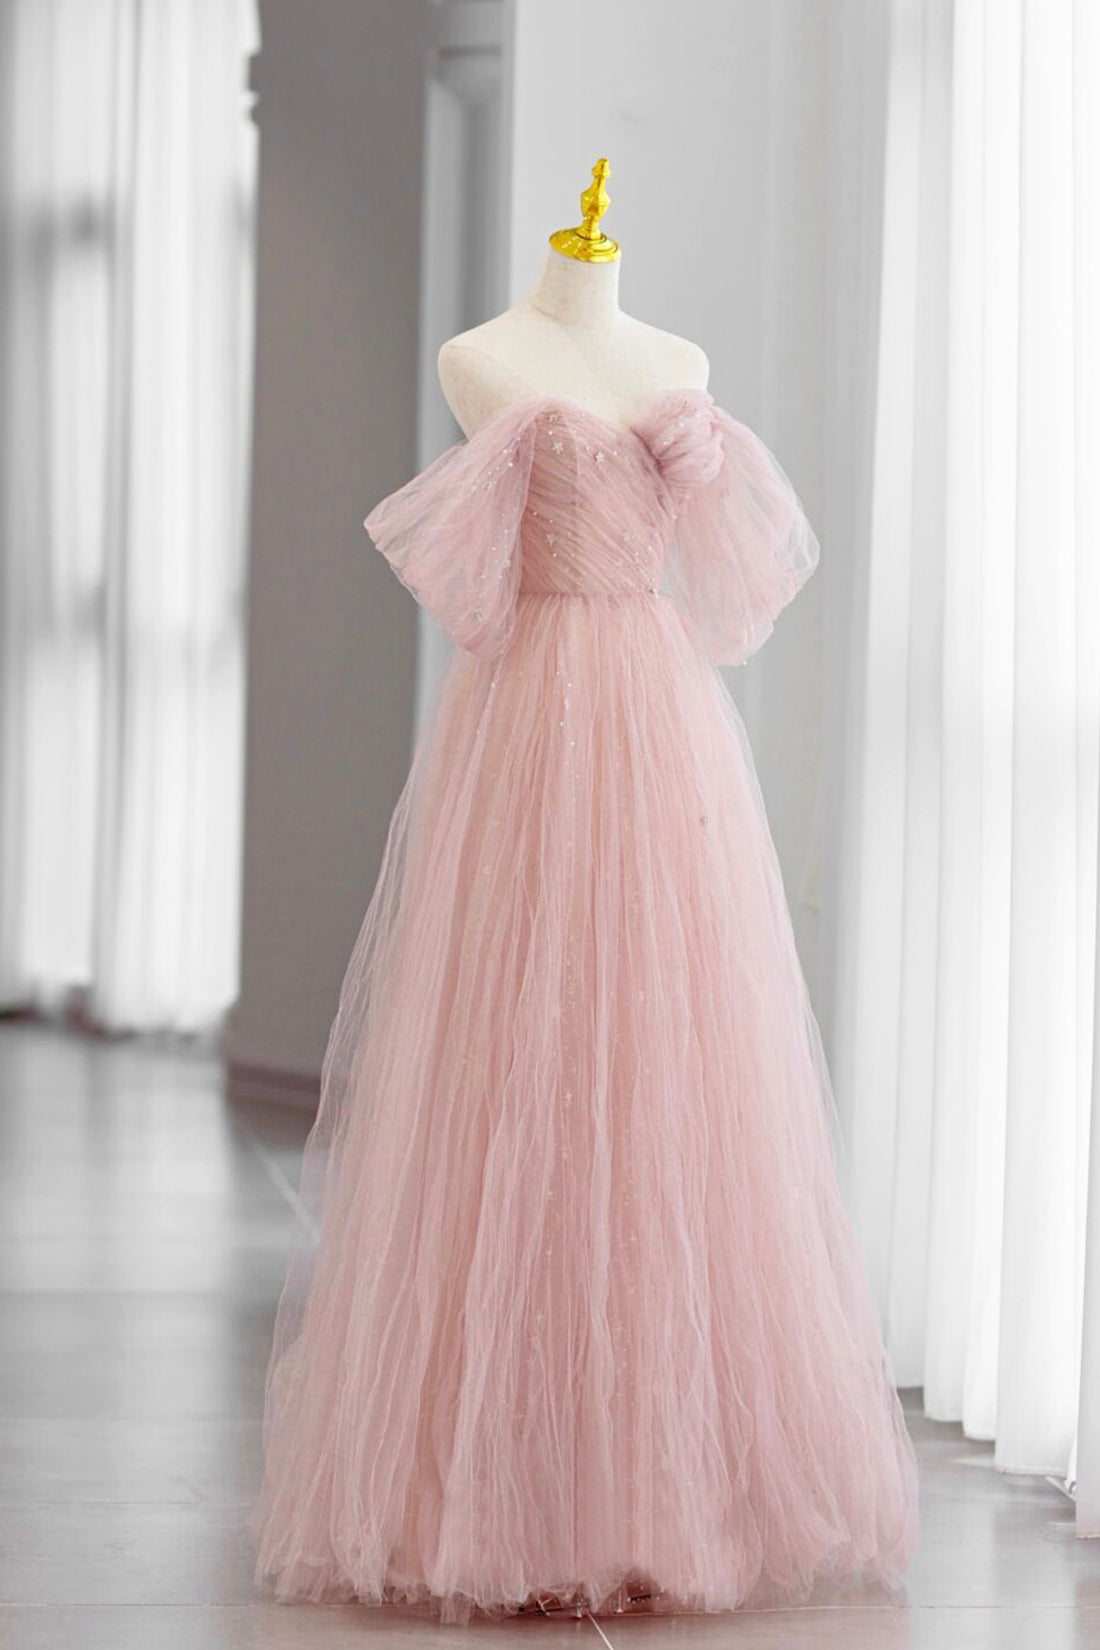 Pink Tulle Floor Length Prom Dress Outfits For Girls, Cute A-Line Evening Party Dress